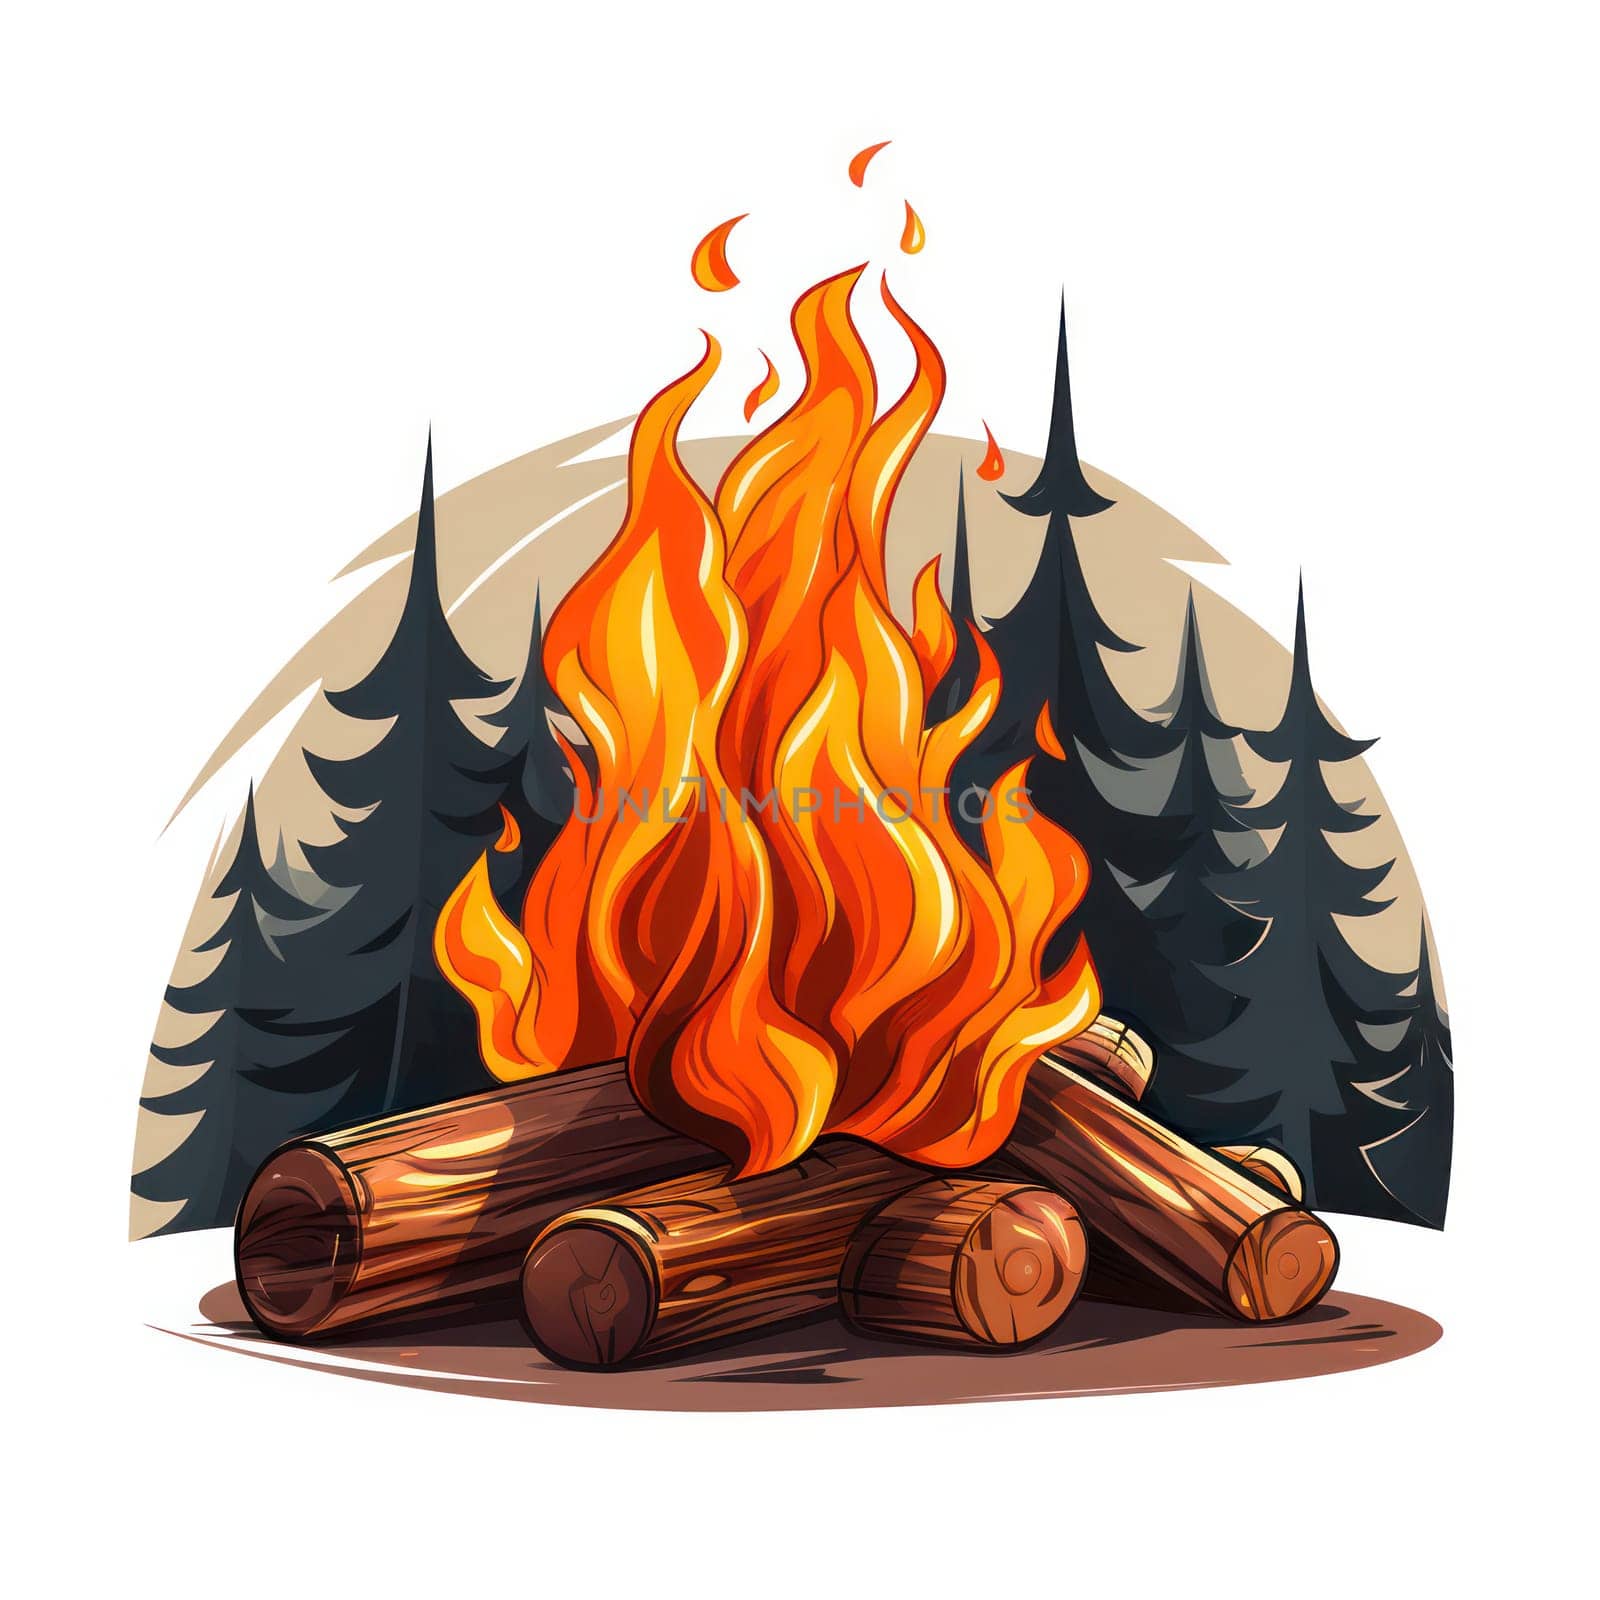 Hot Flames Embracing a Cozy Campfire in the Woods by Vichizh